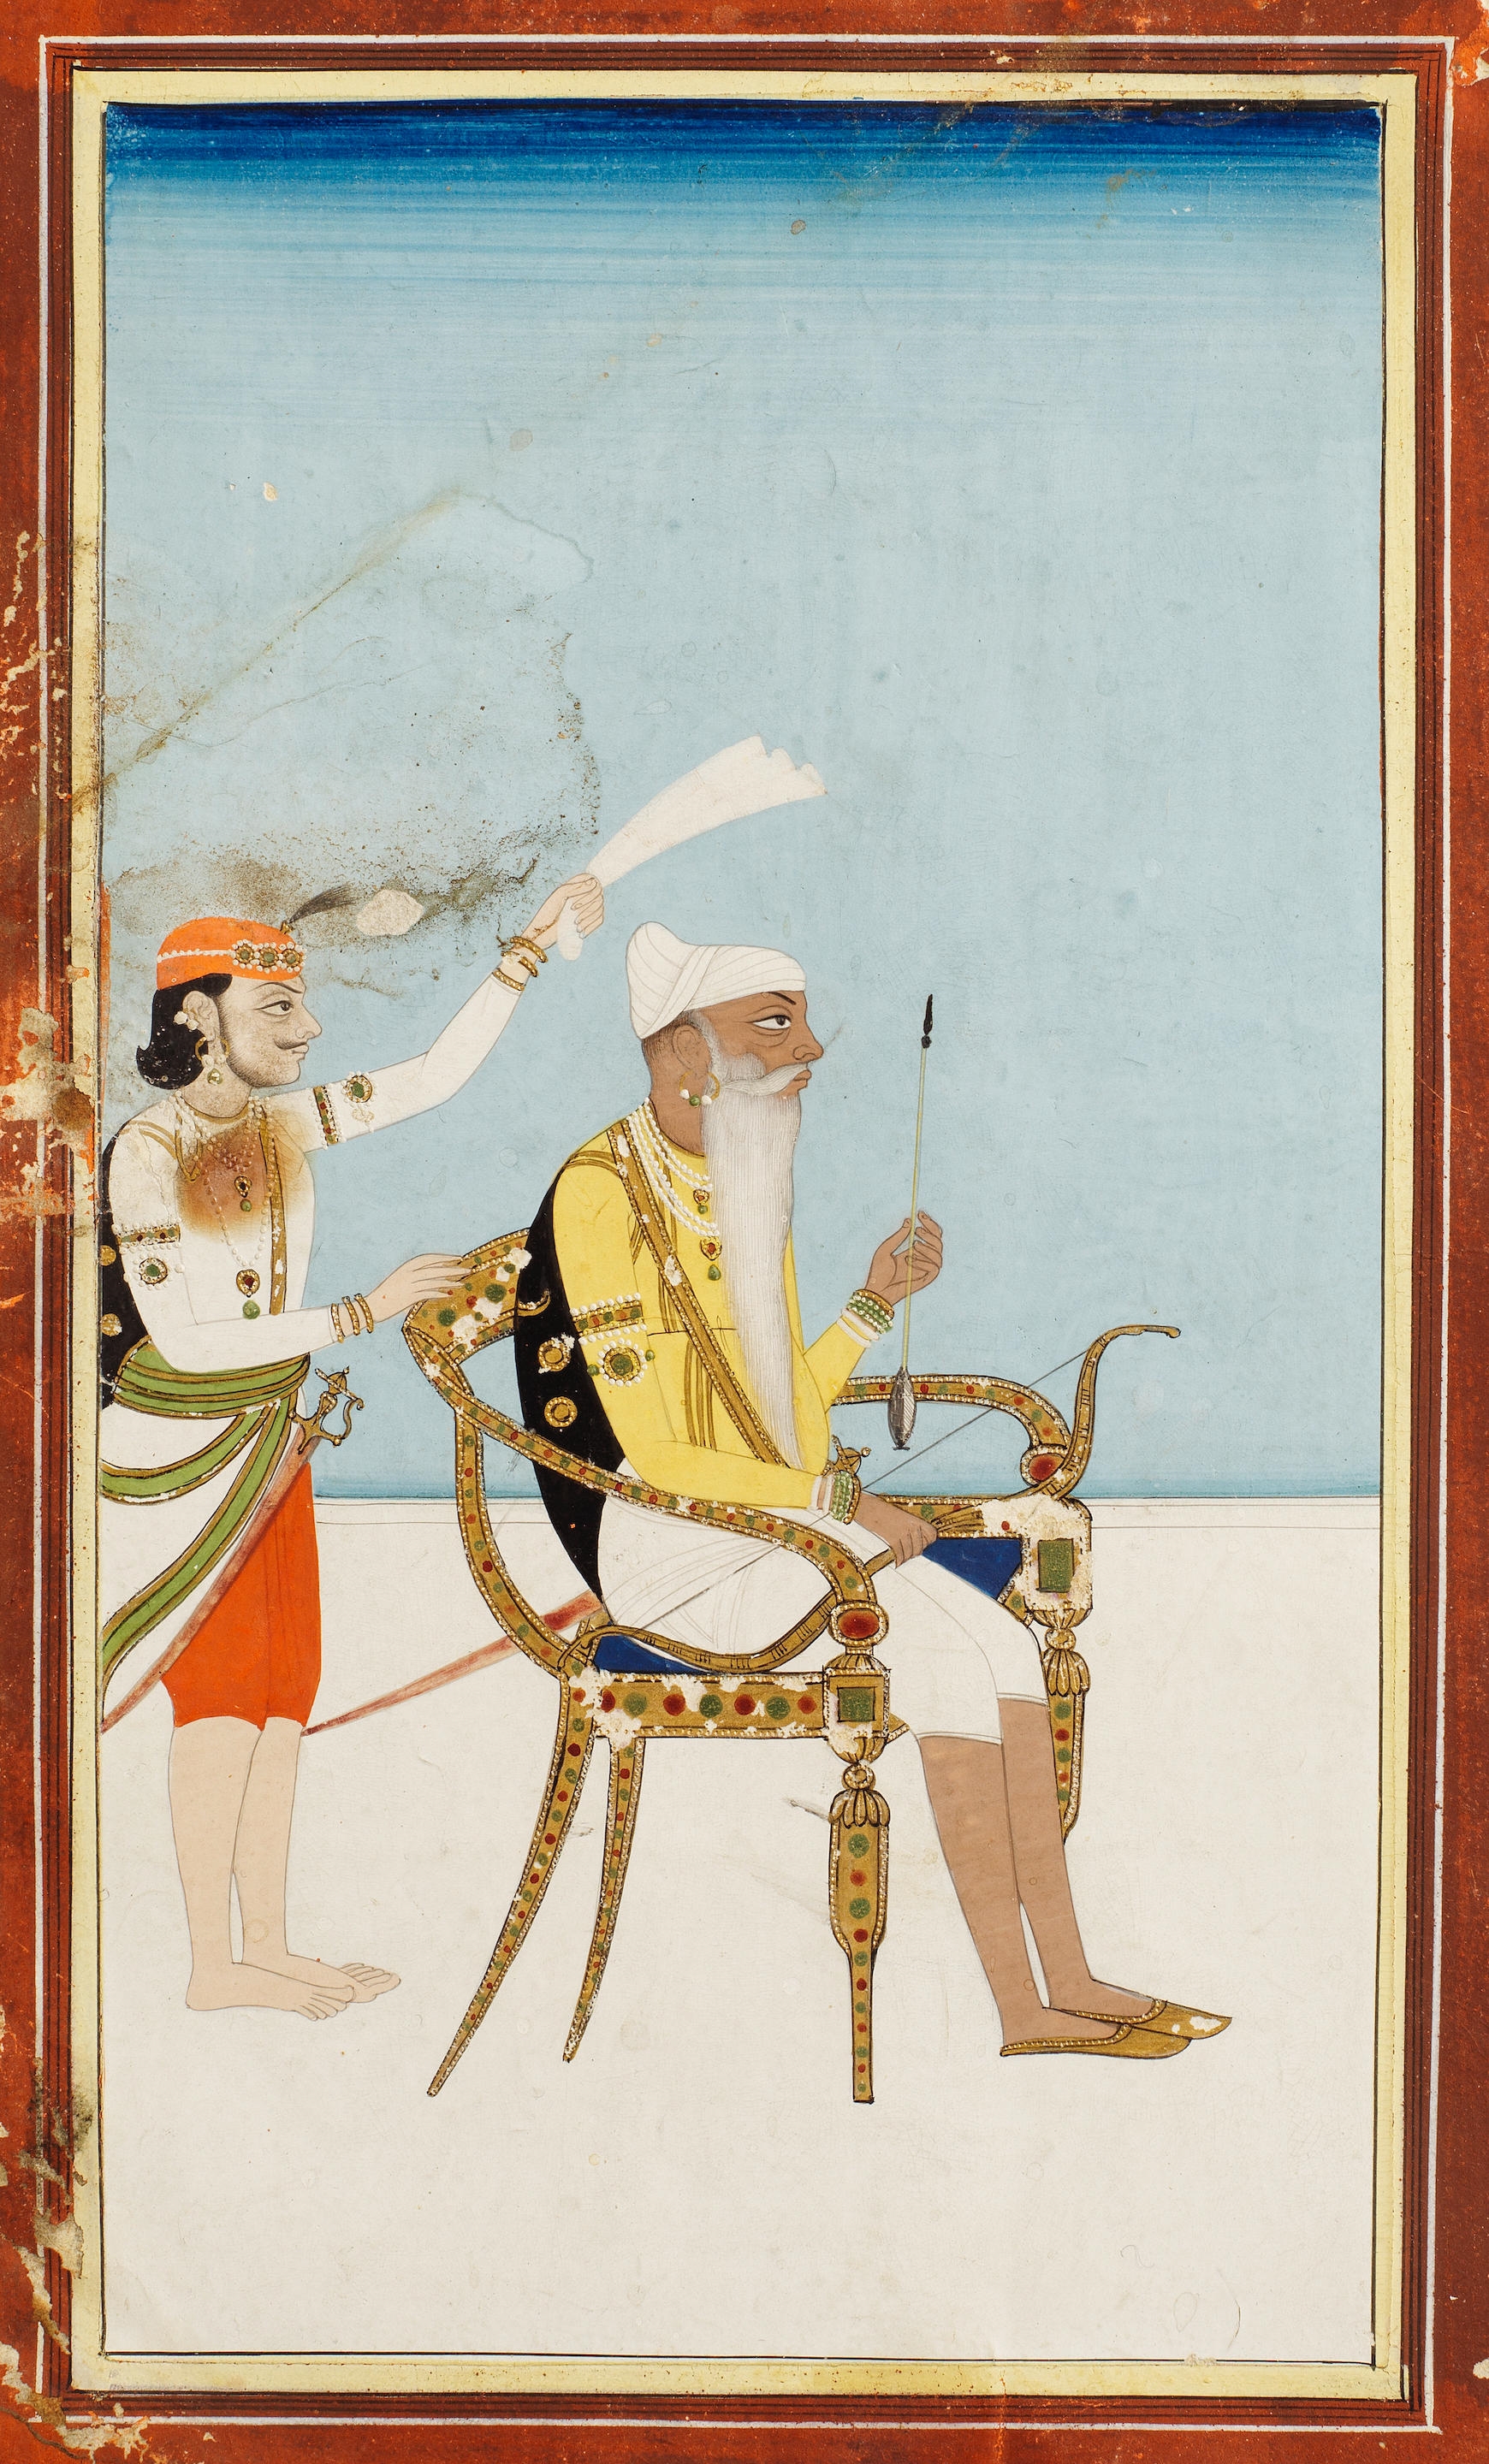 Maharajah Ranjit Singh, holding a bow and an arrow, seated in a chair on a palace terrace, an attendant standing behind him by Punjab School, 19th Century